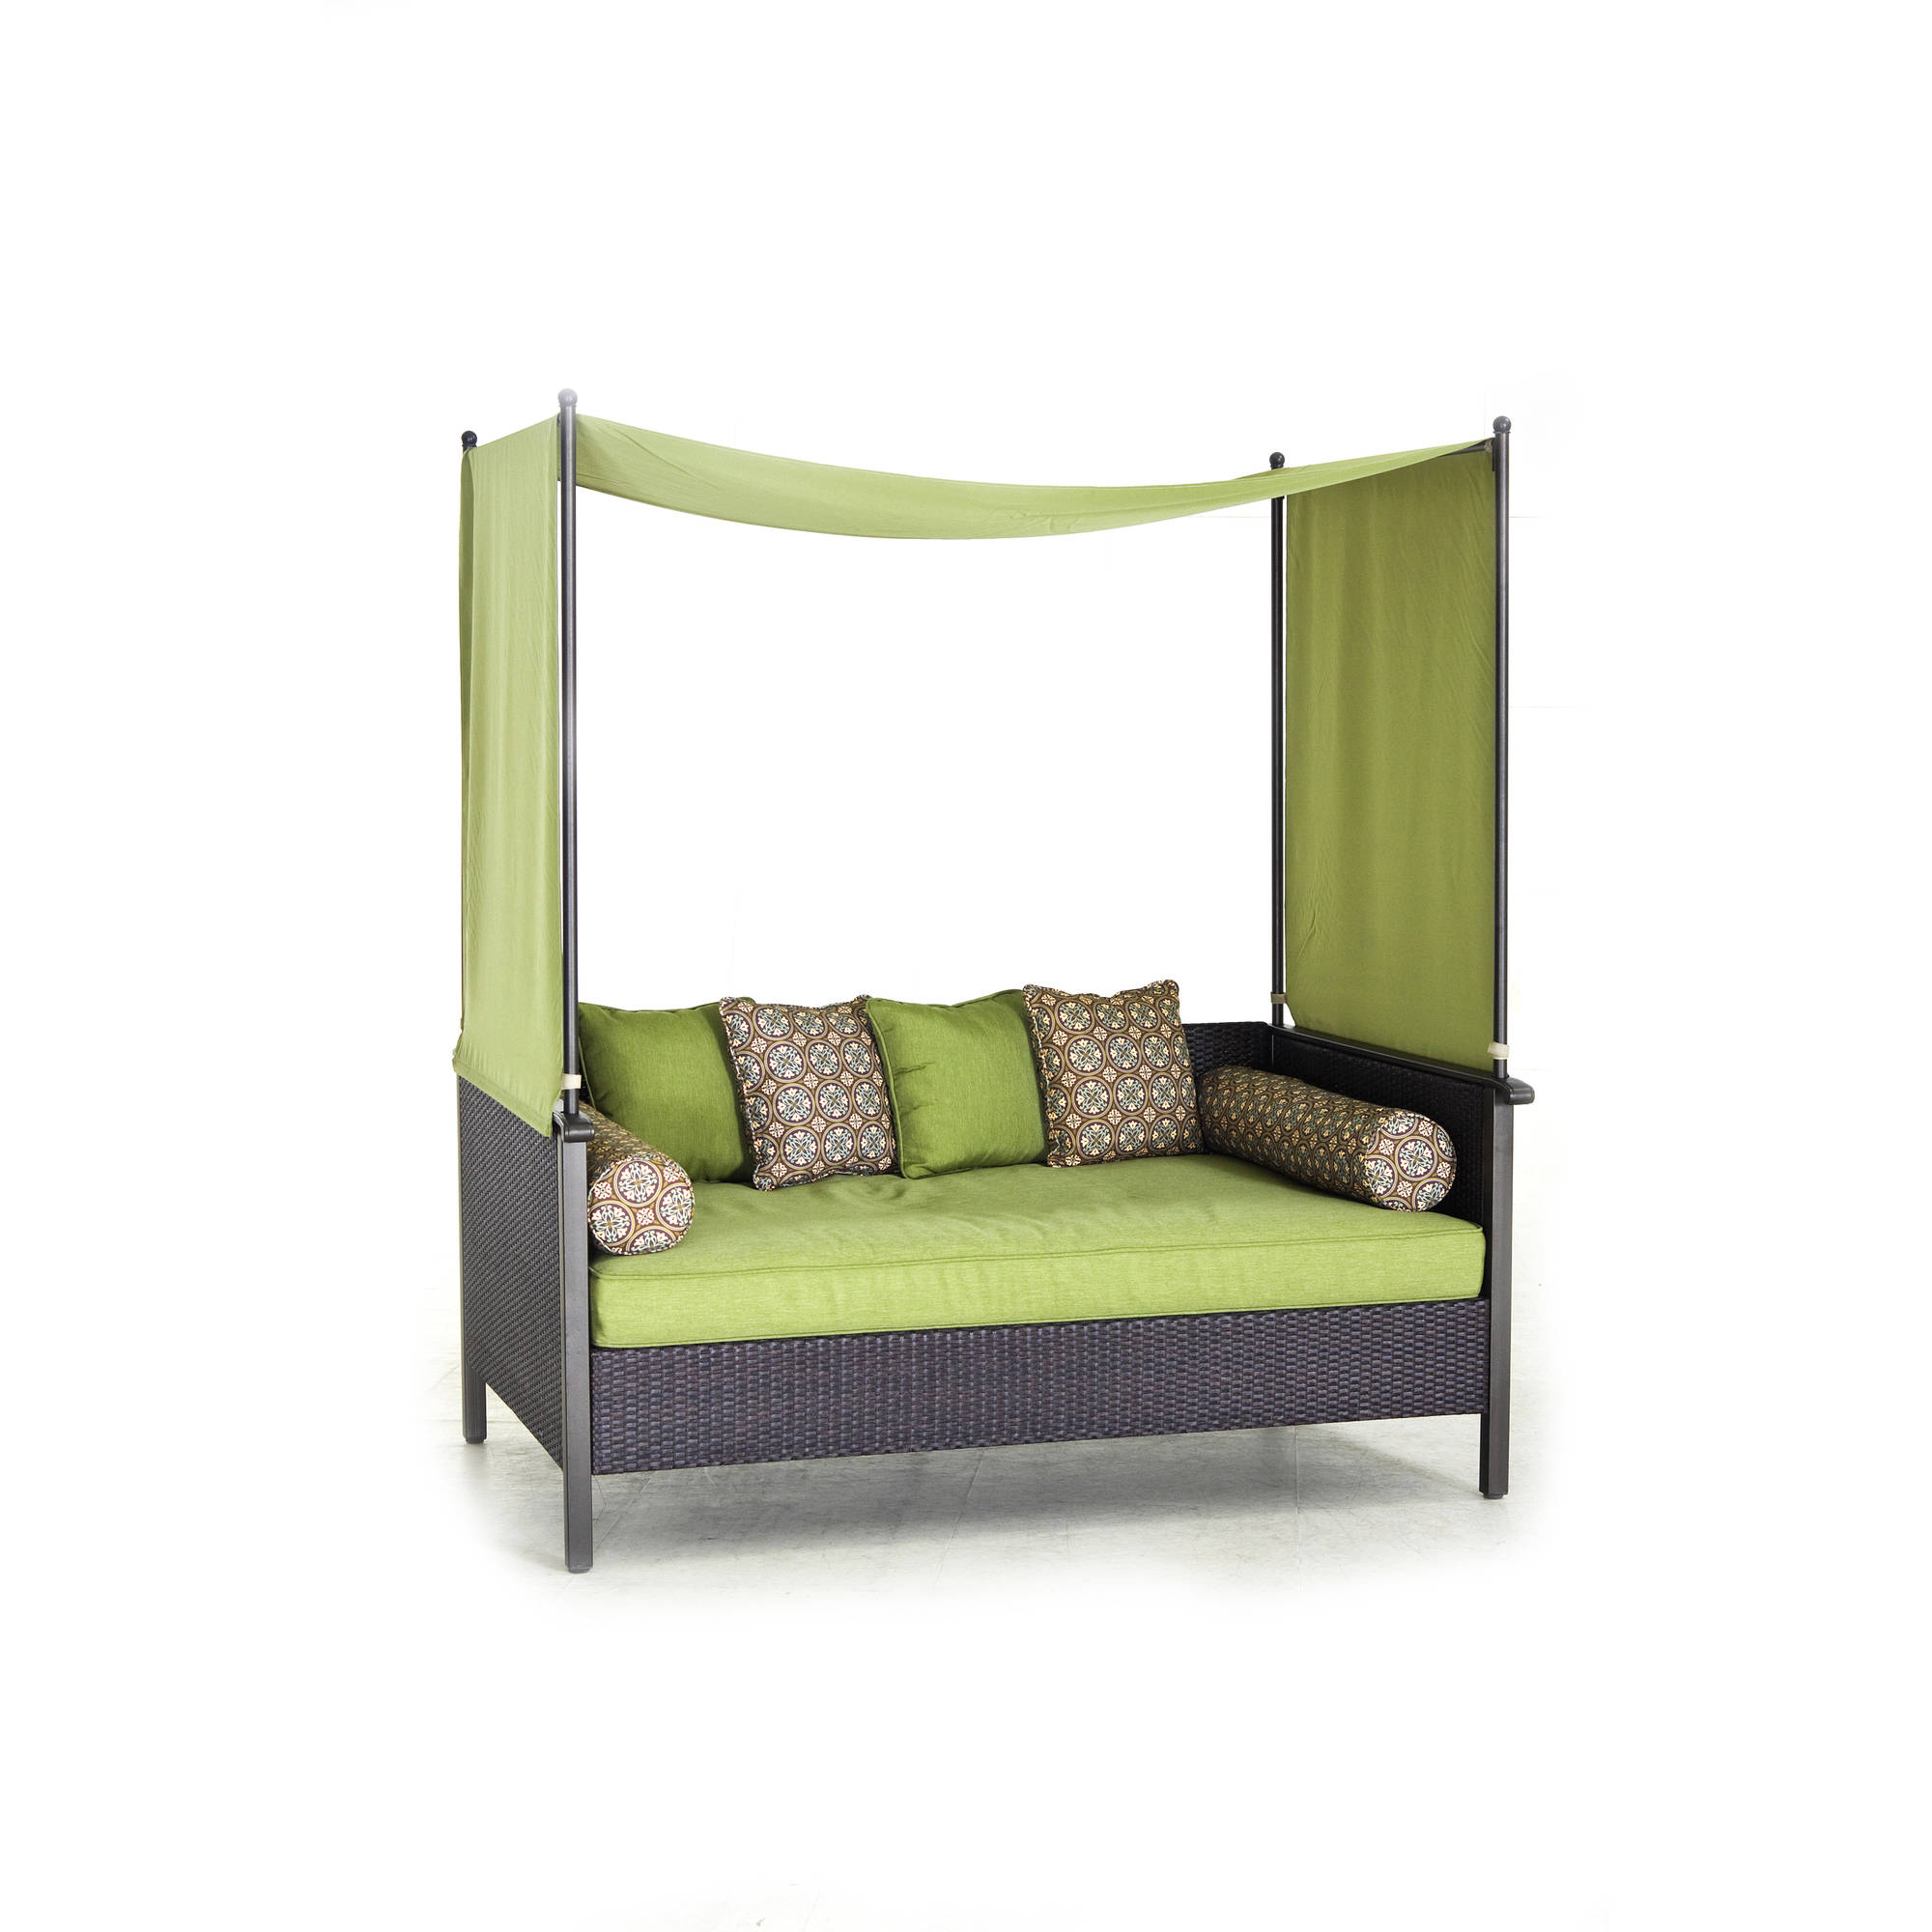 Better Homes & Gardens Providence Outdoor Daybed with Canopy, Green - image 4 of 10